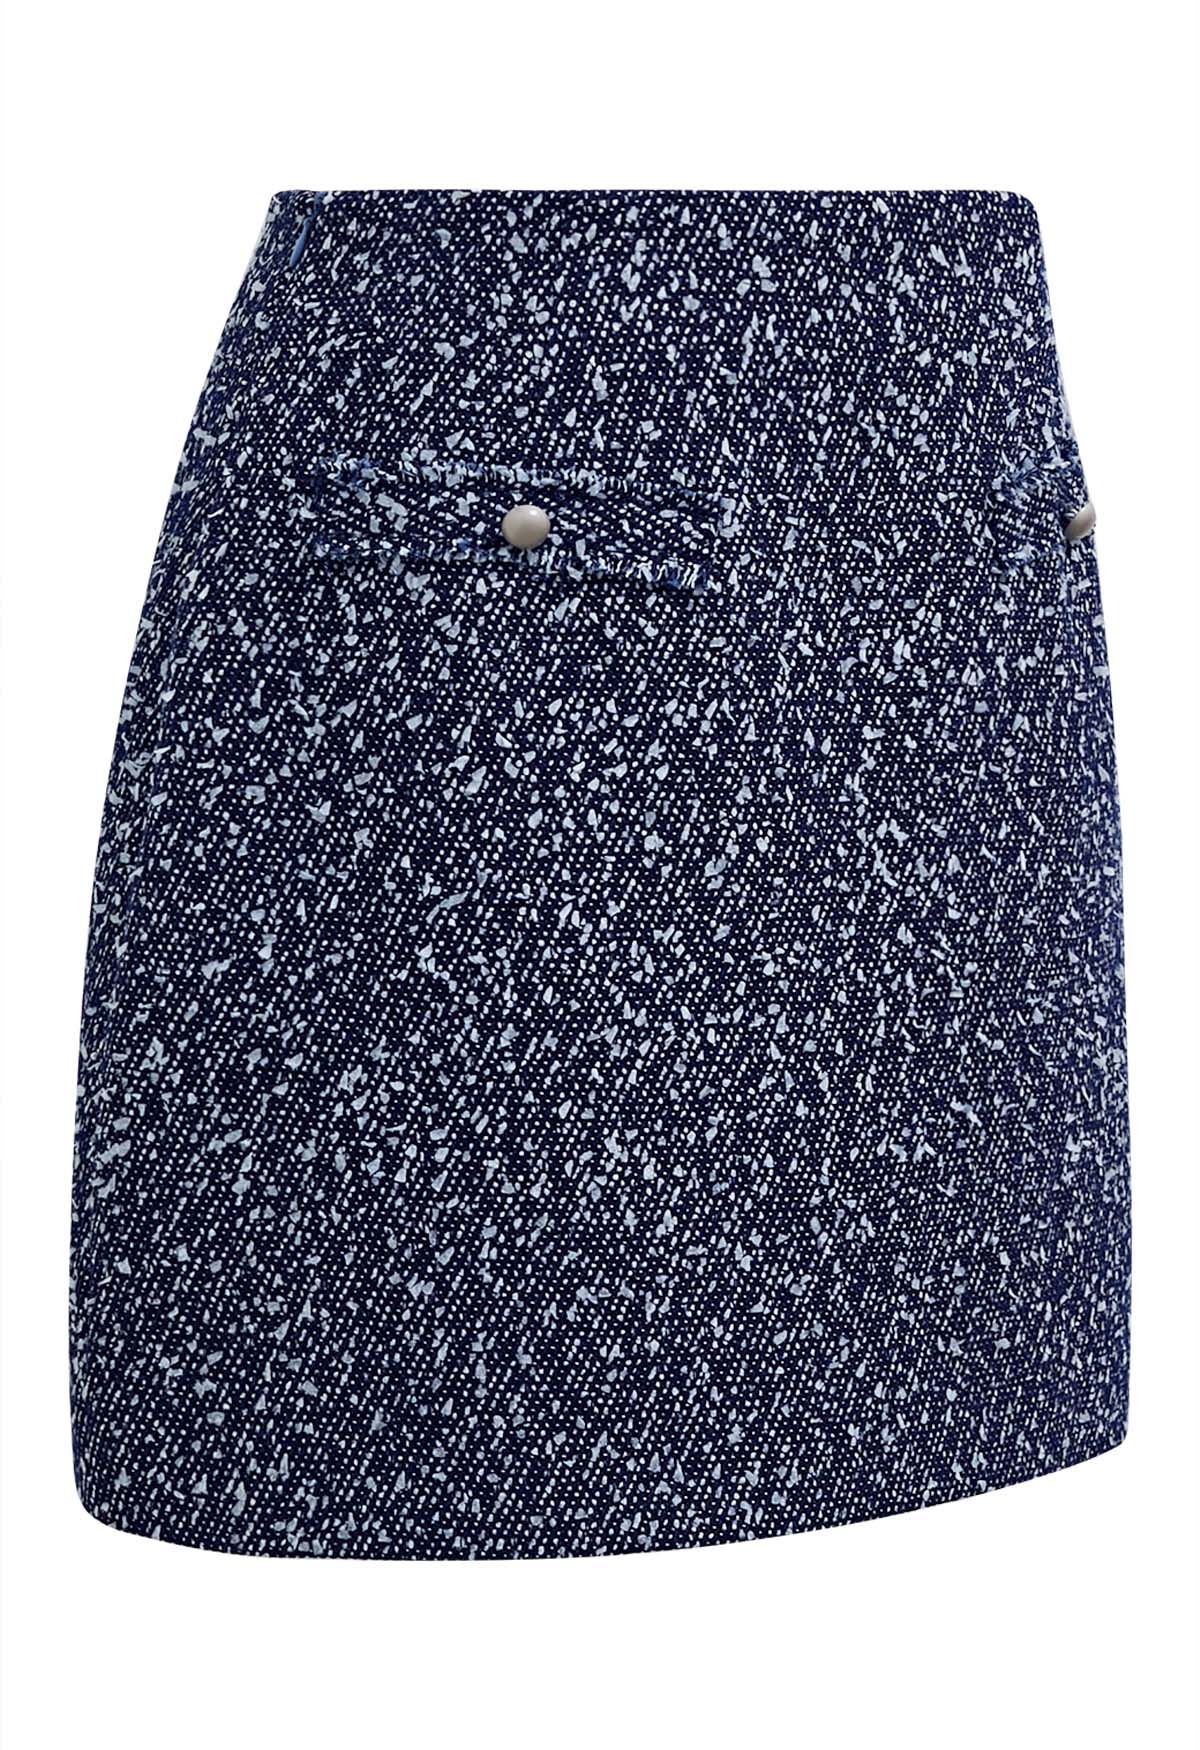 Mix-Color Buttoned Tweed Mini Skirt in Navy